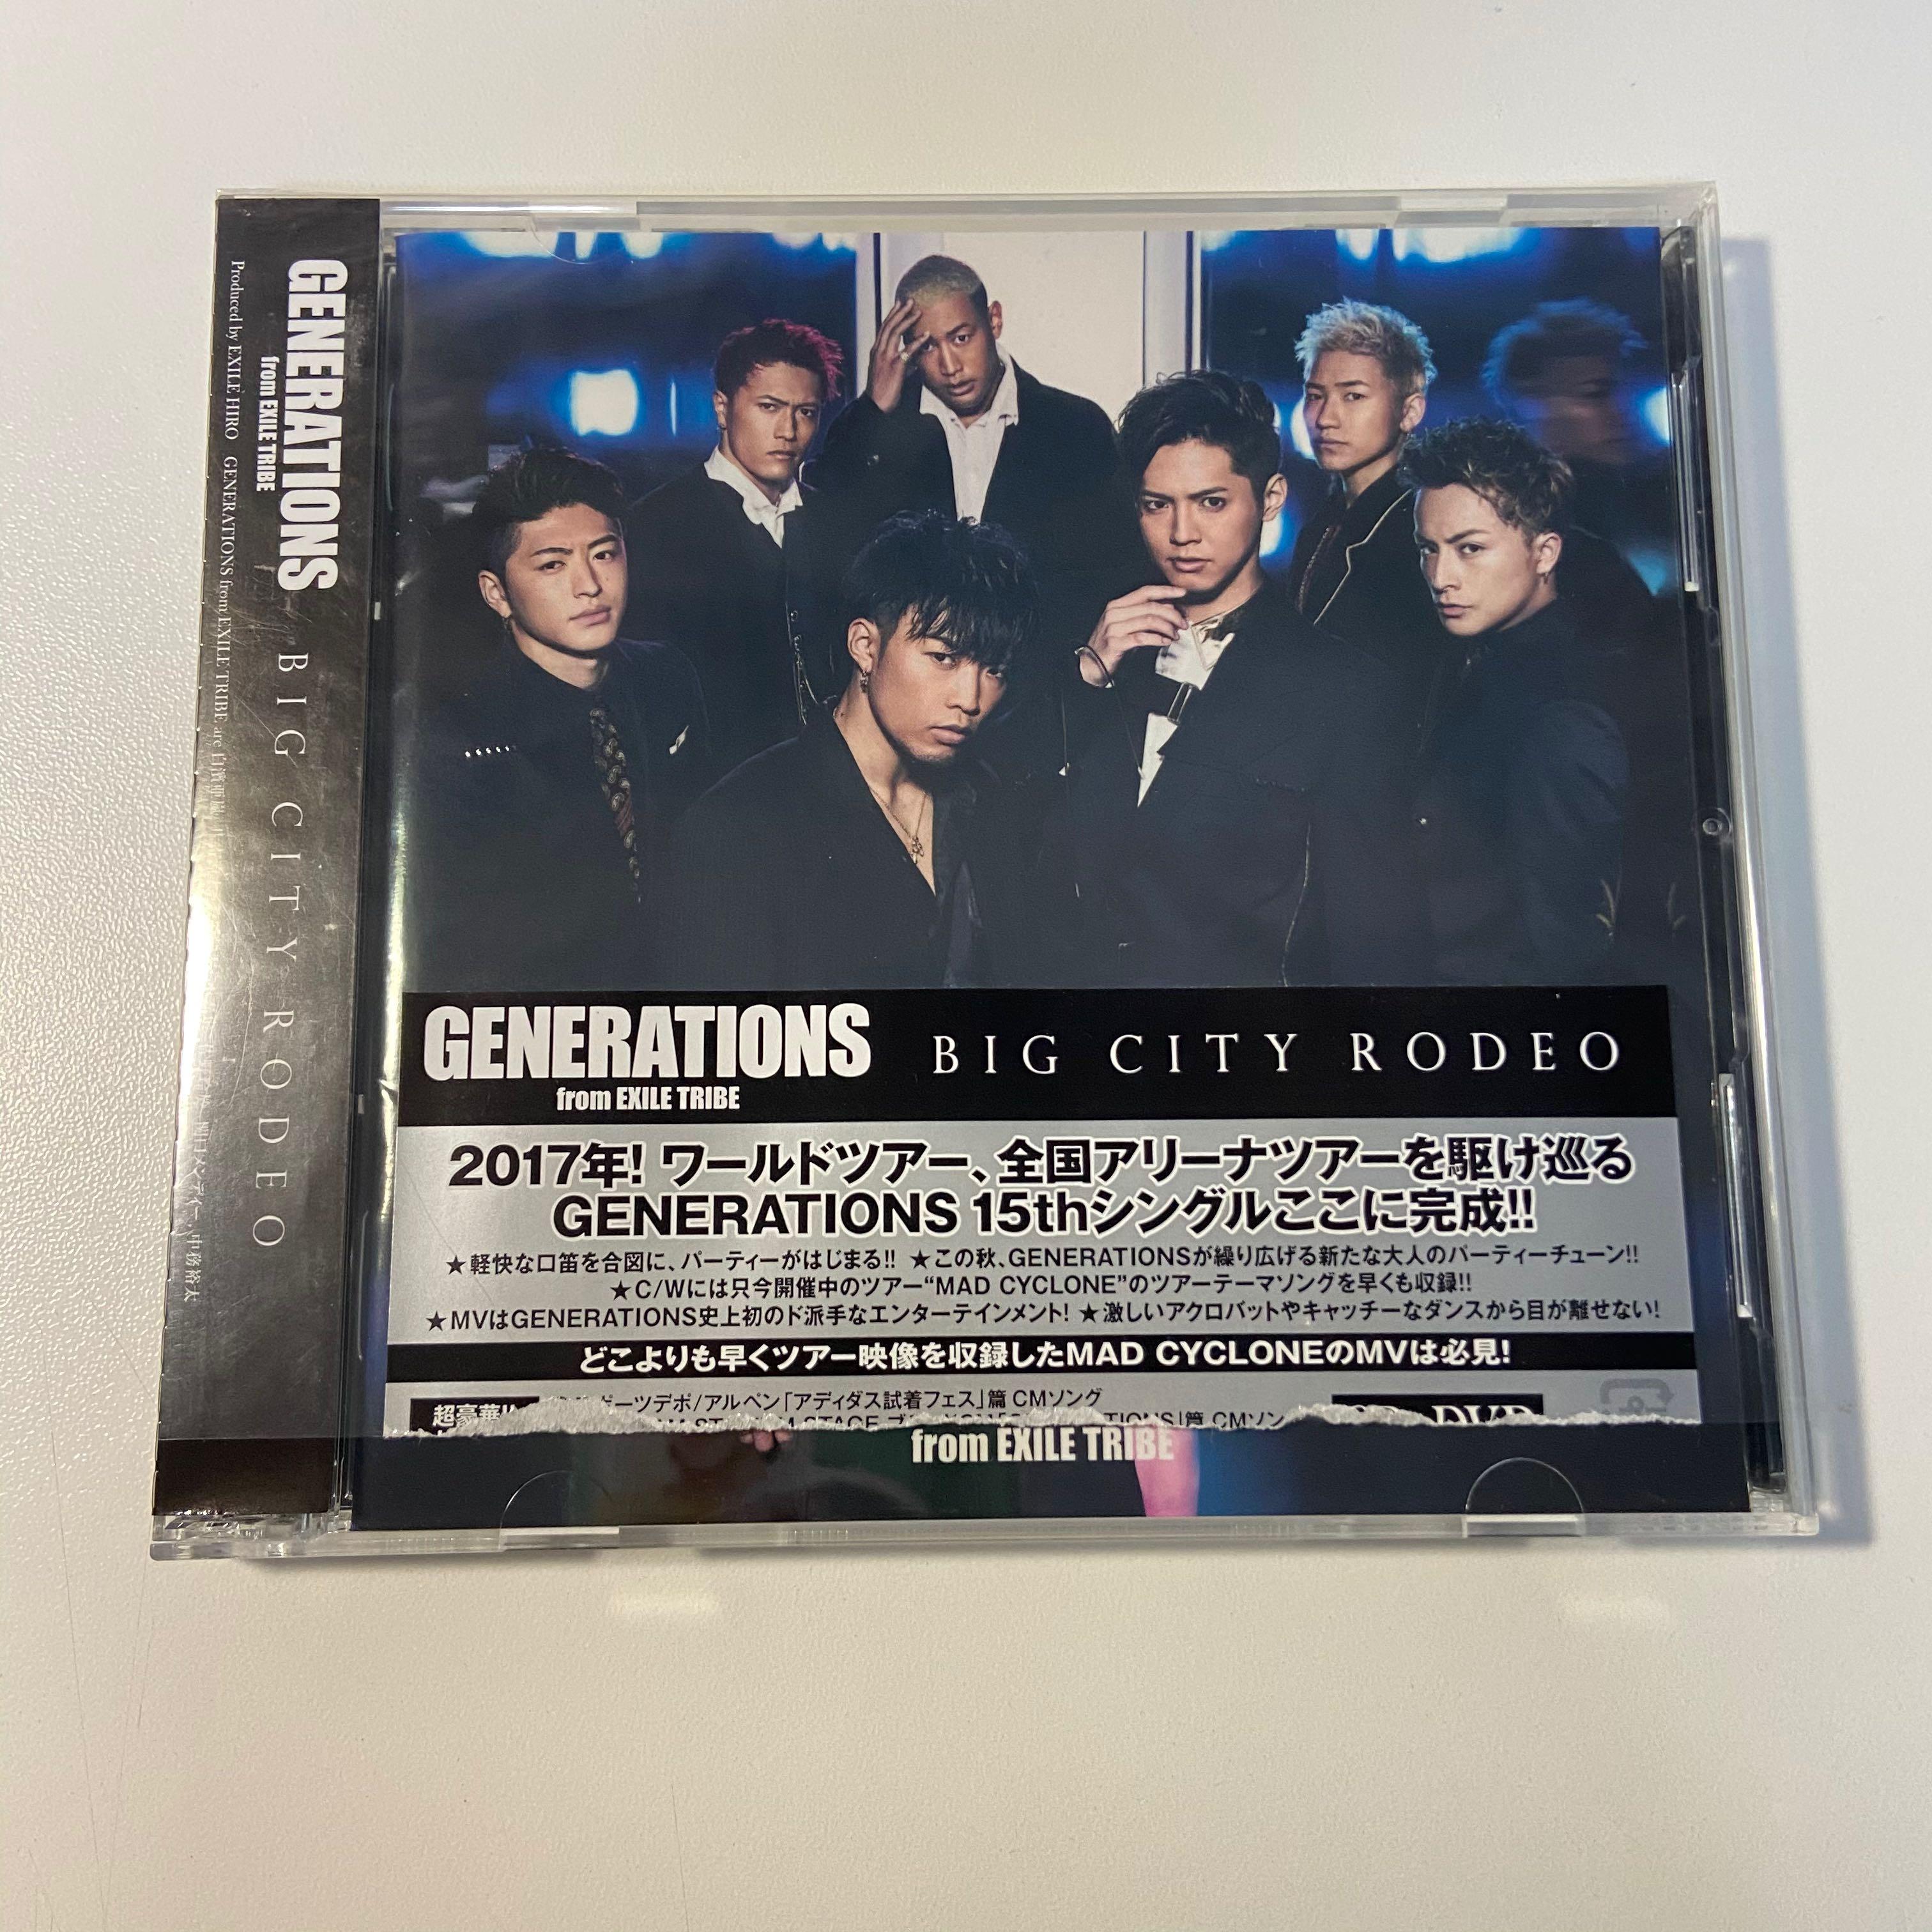 GENERATIONS from EXILE TRIBE CD+DVD, 興趣及遊戲, 收藏品及紀念品